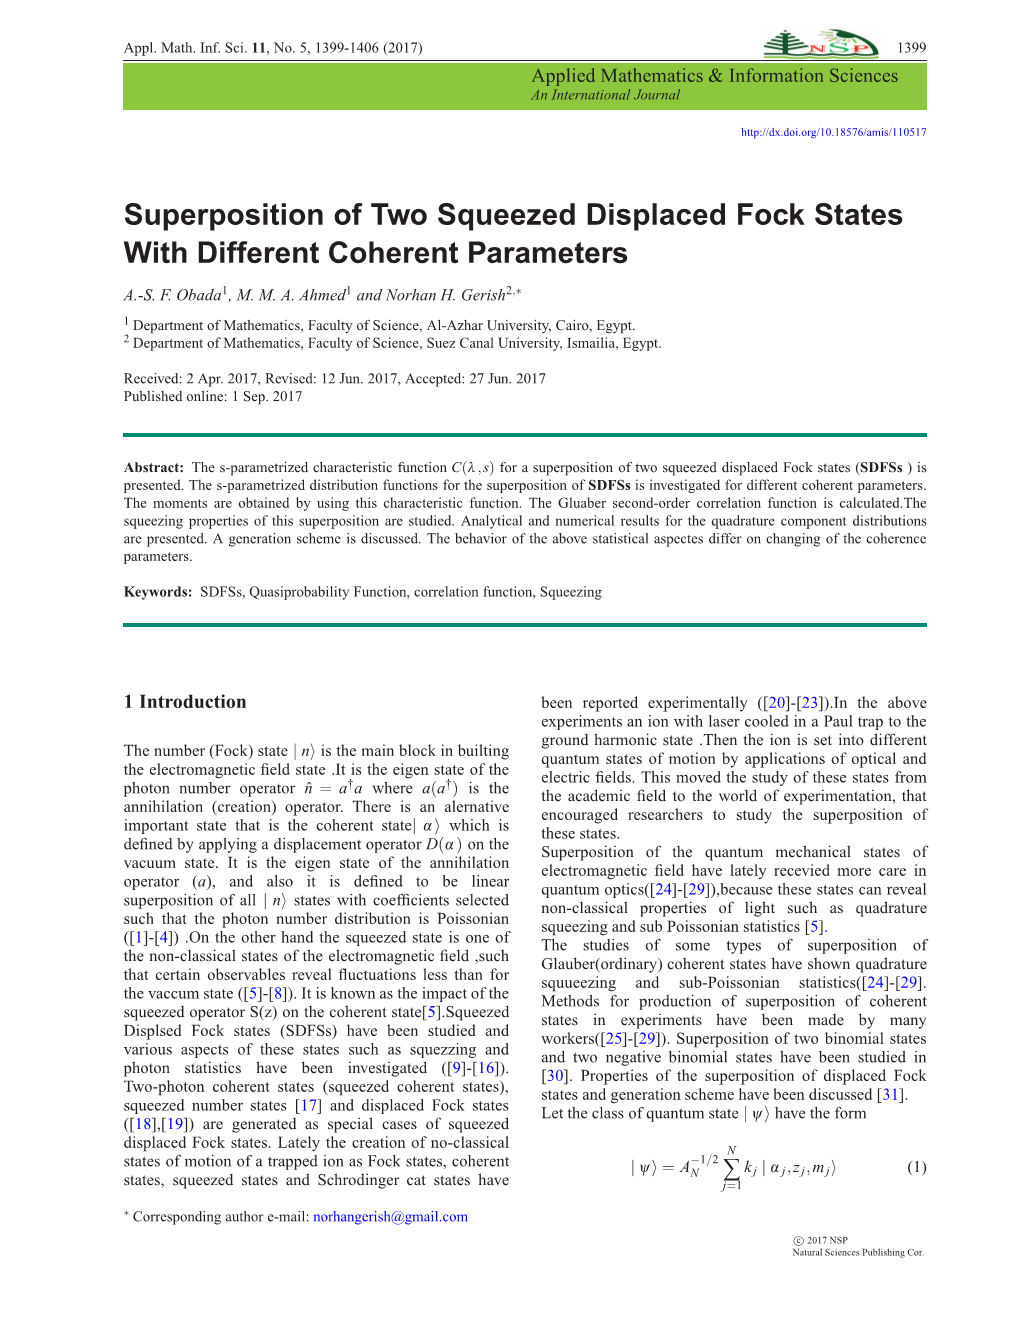 Superposition of Two Squeezed Displaced Fock States with Different Coherent Parameters